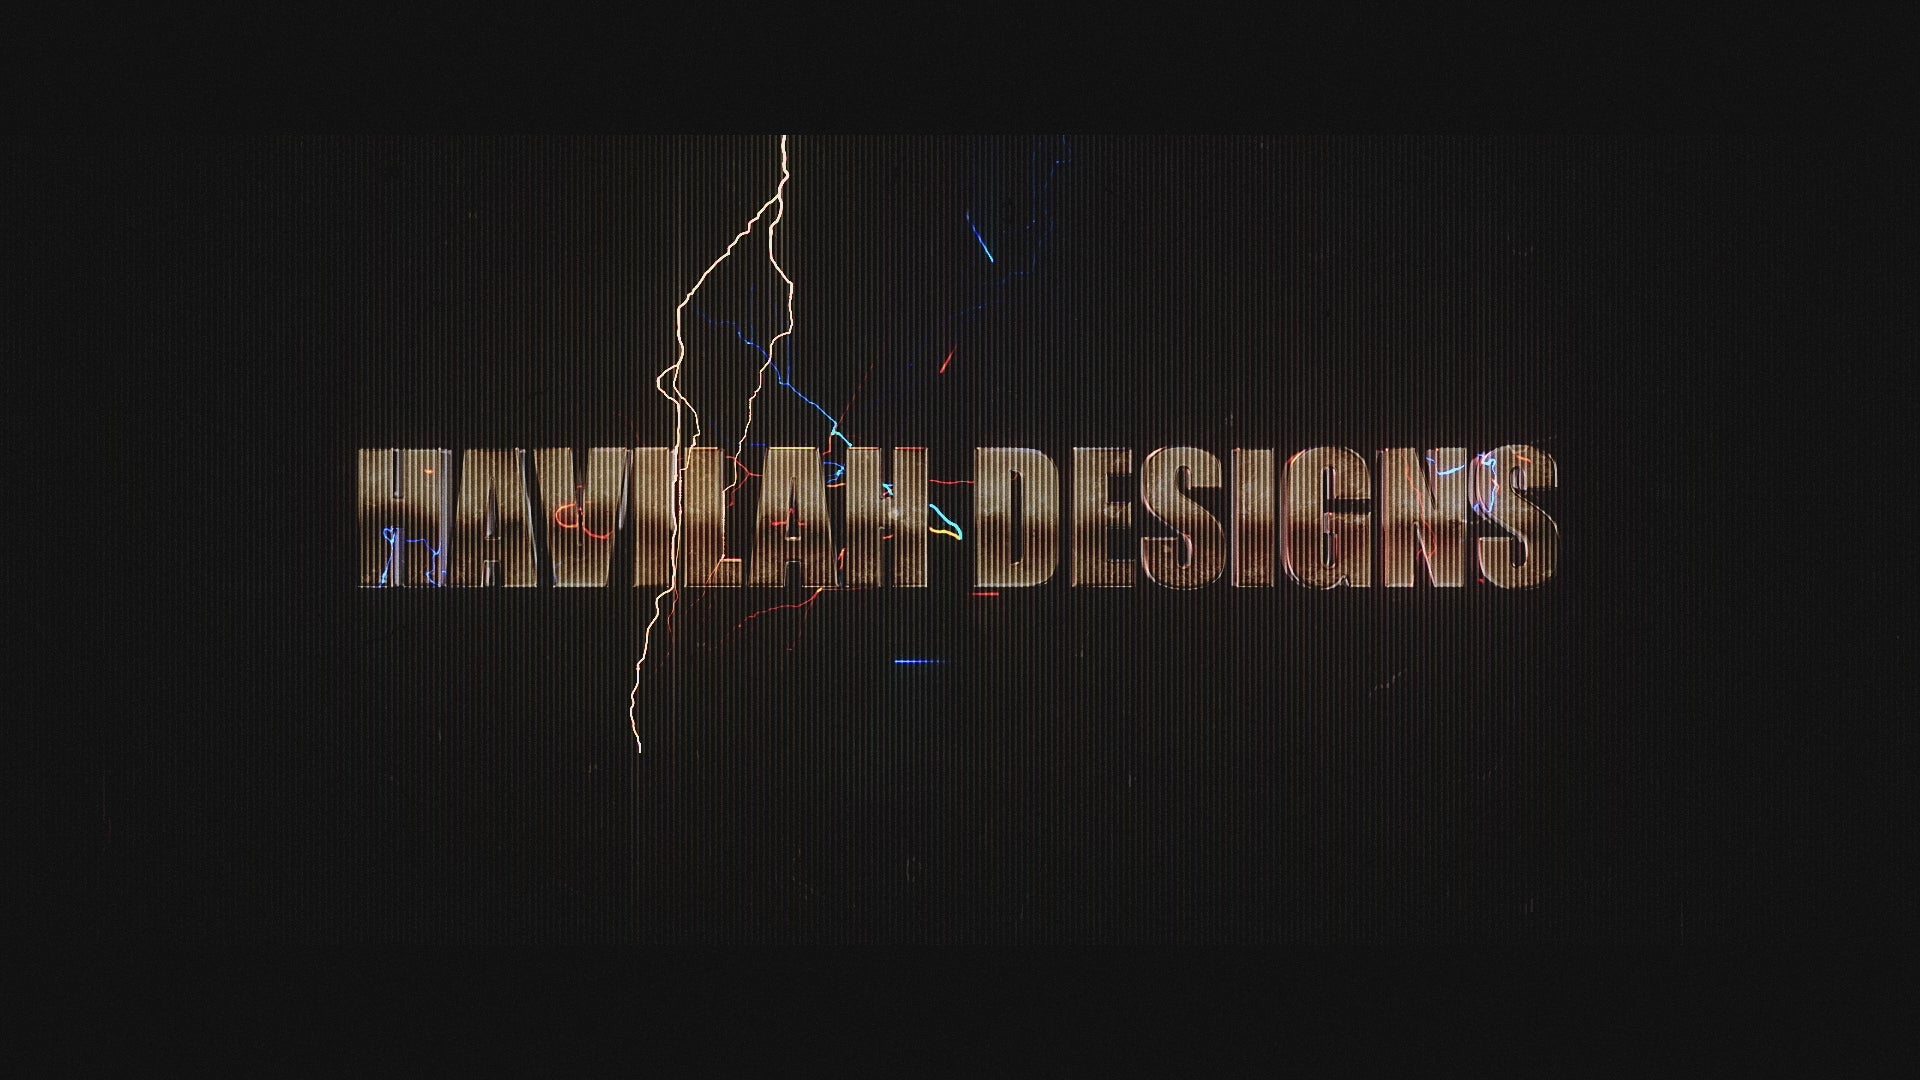 Tải video: Check out this promotional video introducing Havilah Designs&#39; top-notch services to a global audience!